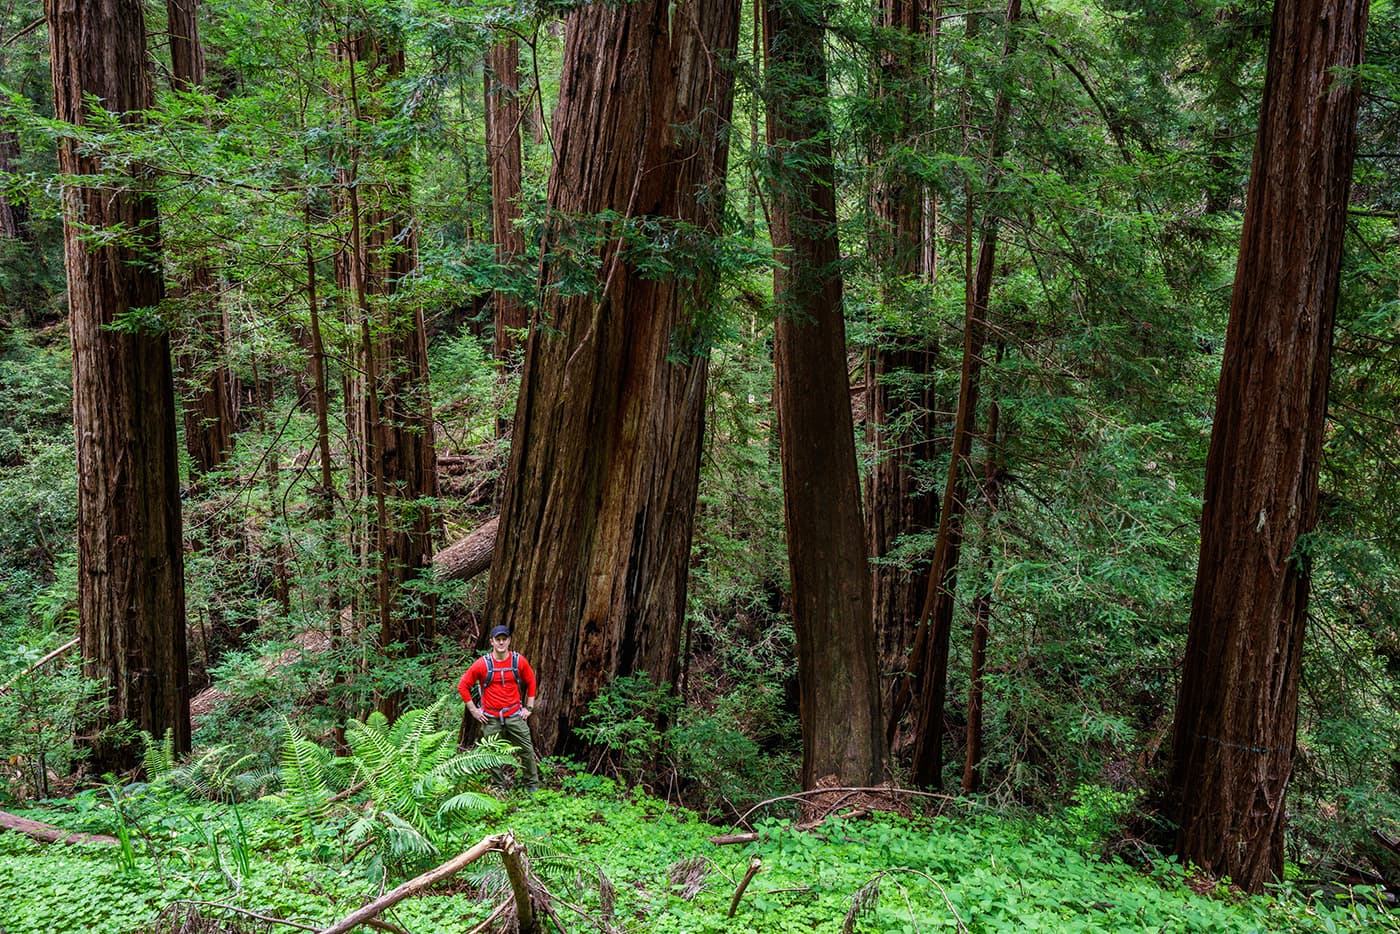 Dan Winterson, with the Gordon and Betty Moore Foundation, stands among the approximately 100 acres of old-growth coast redwoods on the Cascade Creek property.